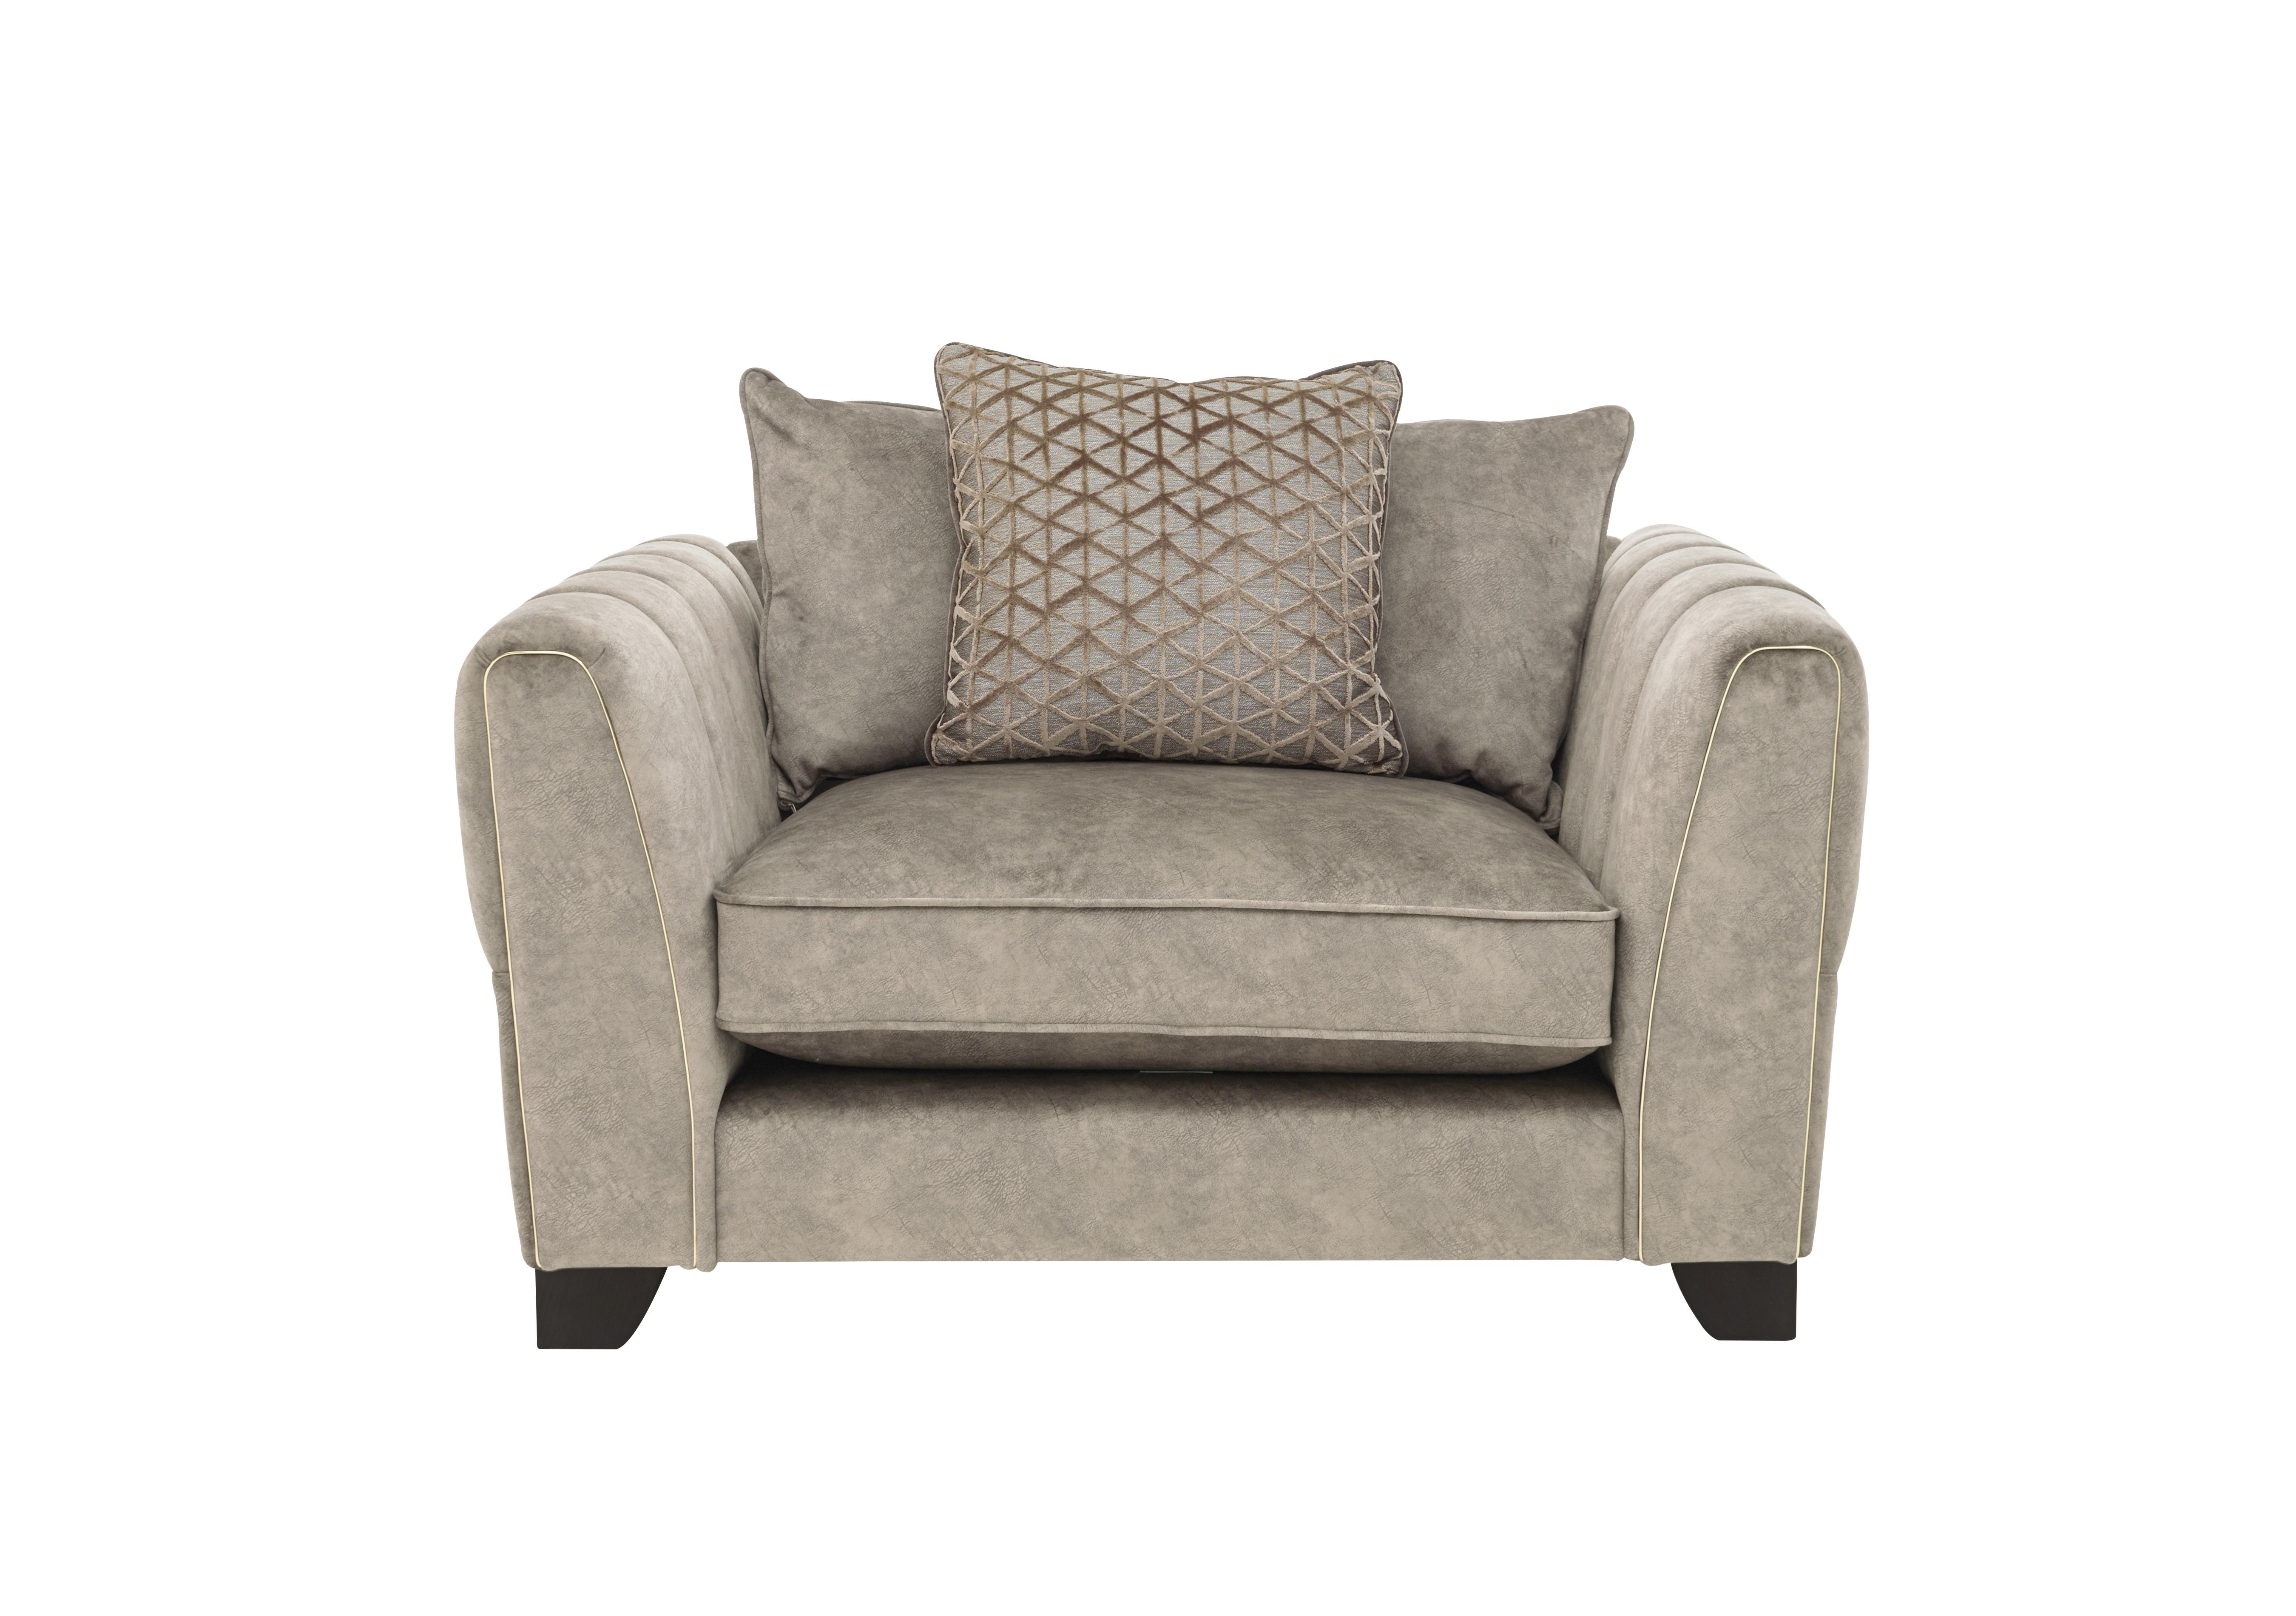 Ariana Pillow Back Fabric Snuggler Chair in Dapple Oyster Brass Insert on Furniture Village